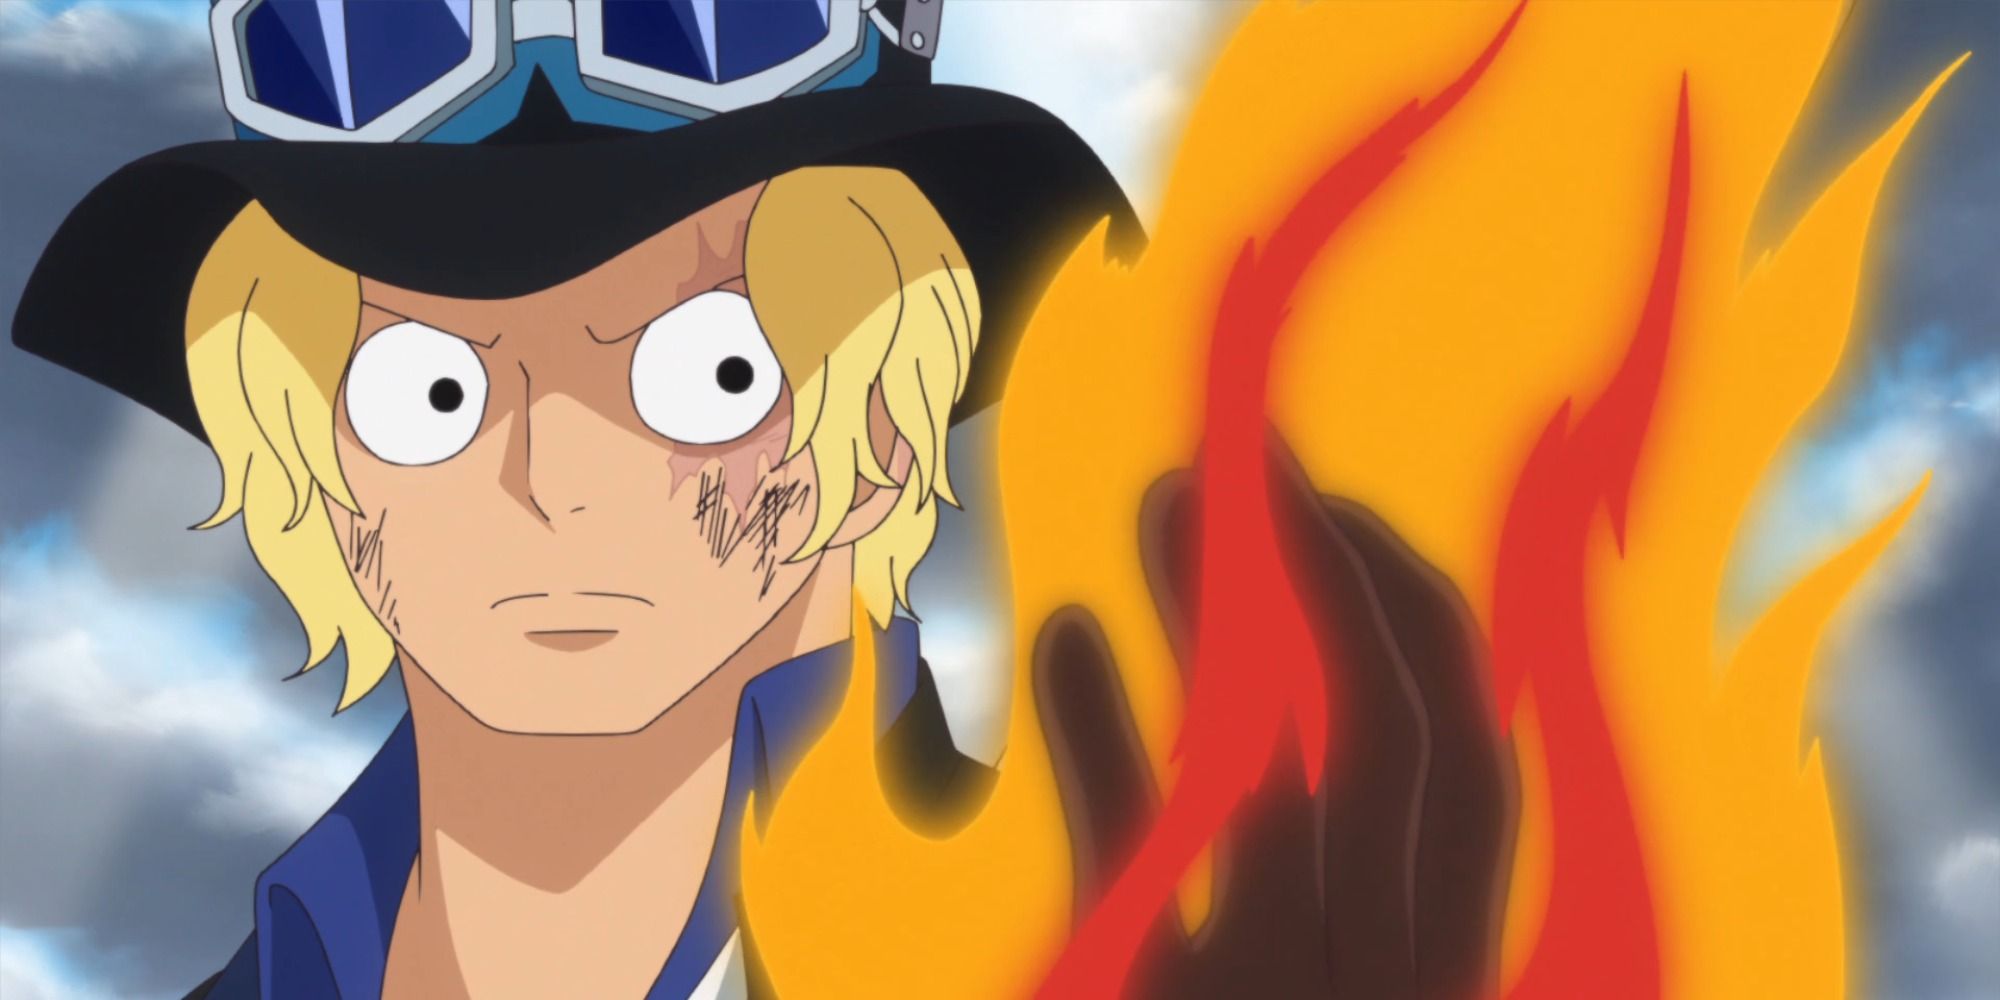 Sabo from One Piece